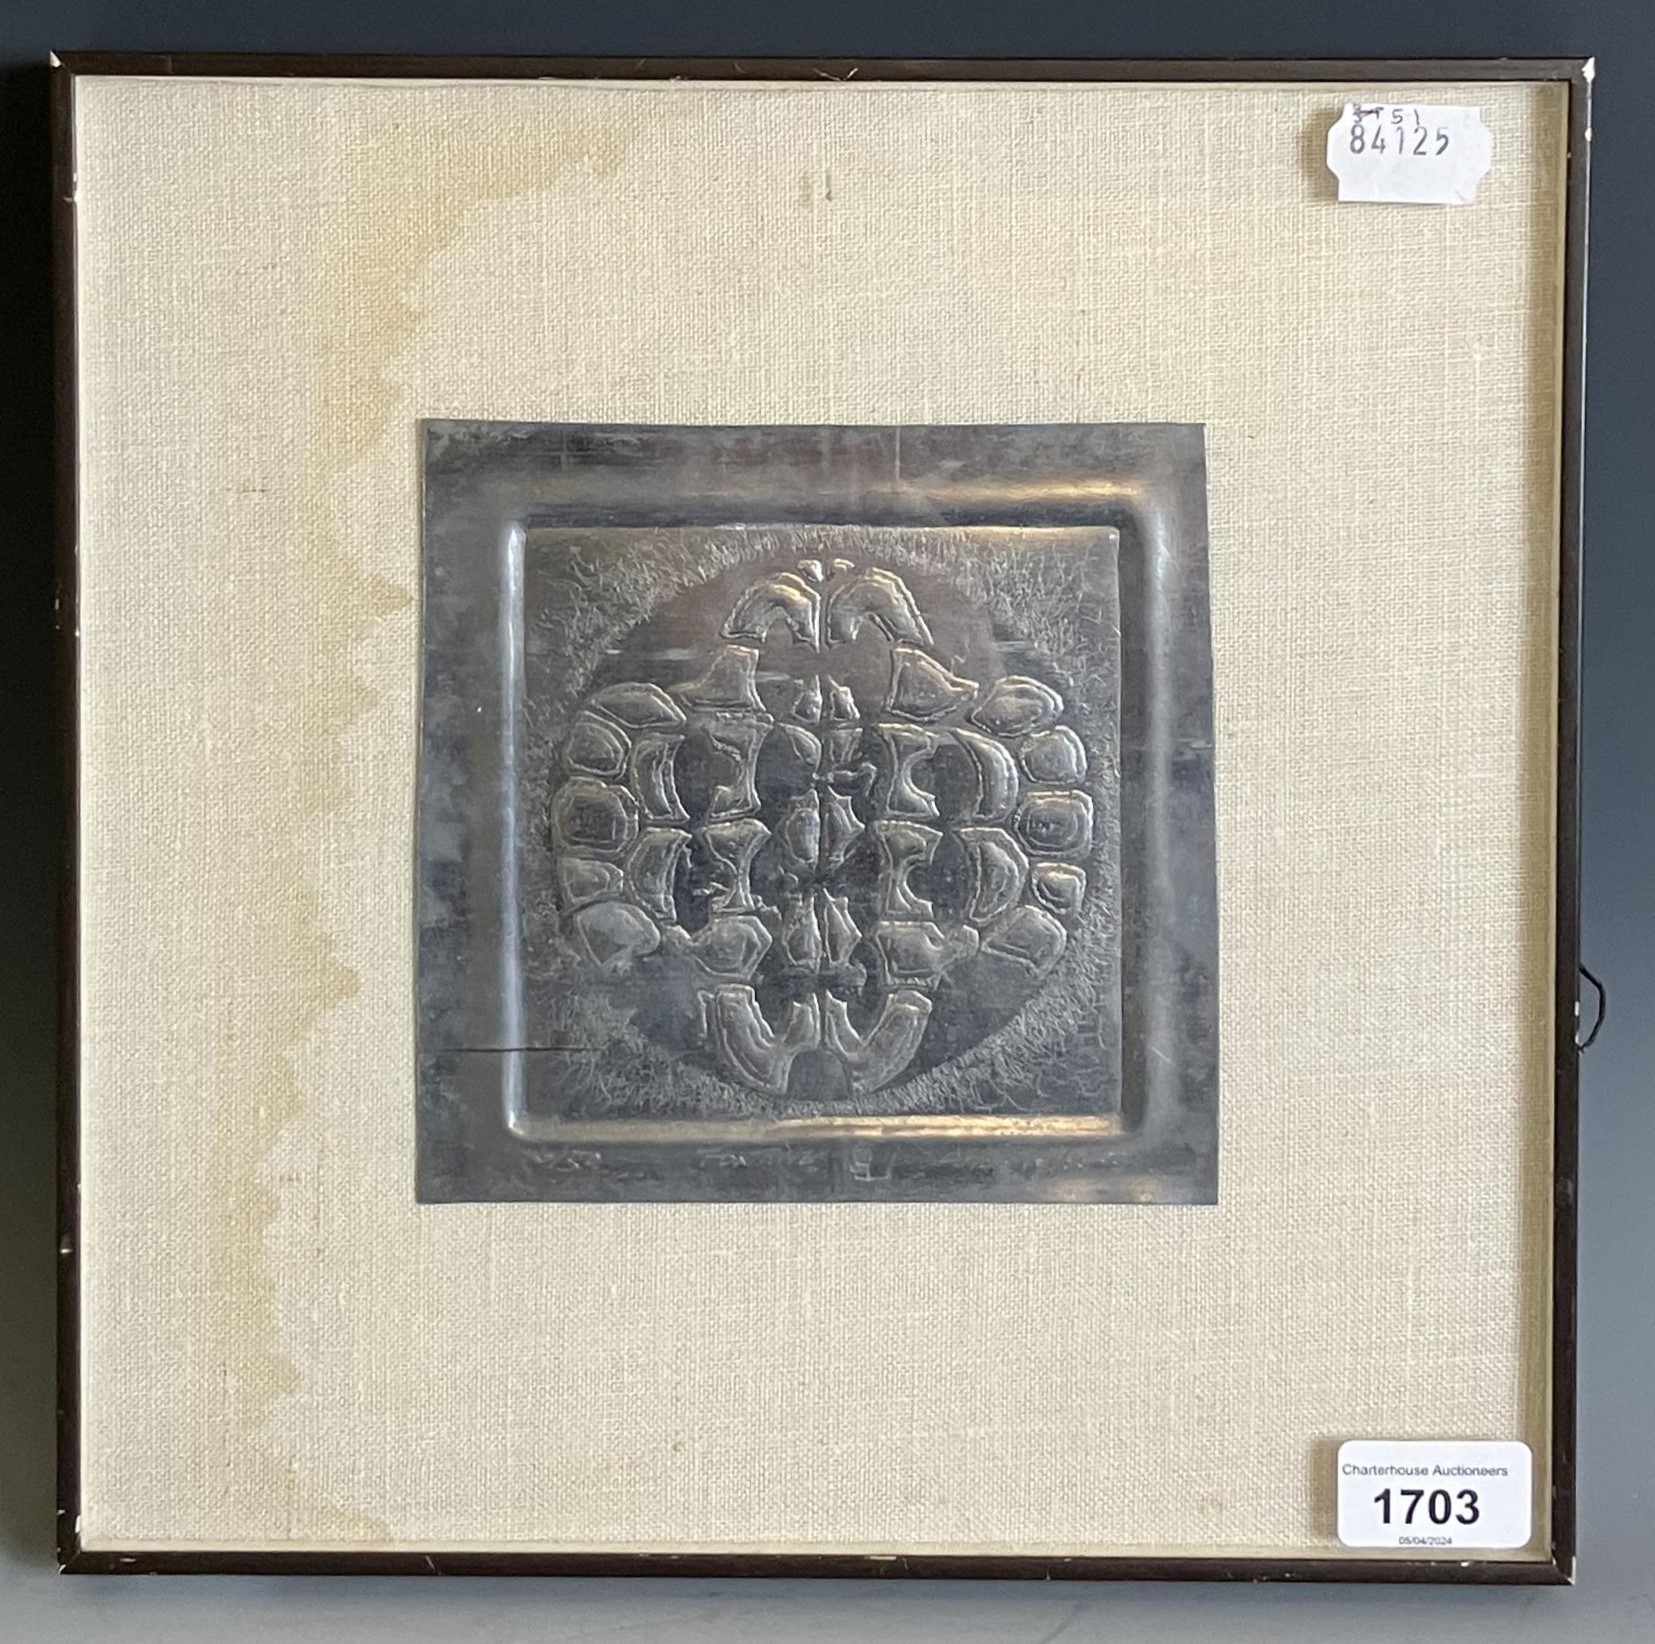 Cheung Yee (Chinese 1936-2019), Fortune, limited edition pressing, 6/50, 15 x 16 cm